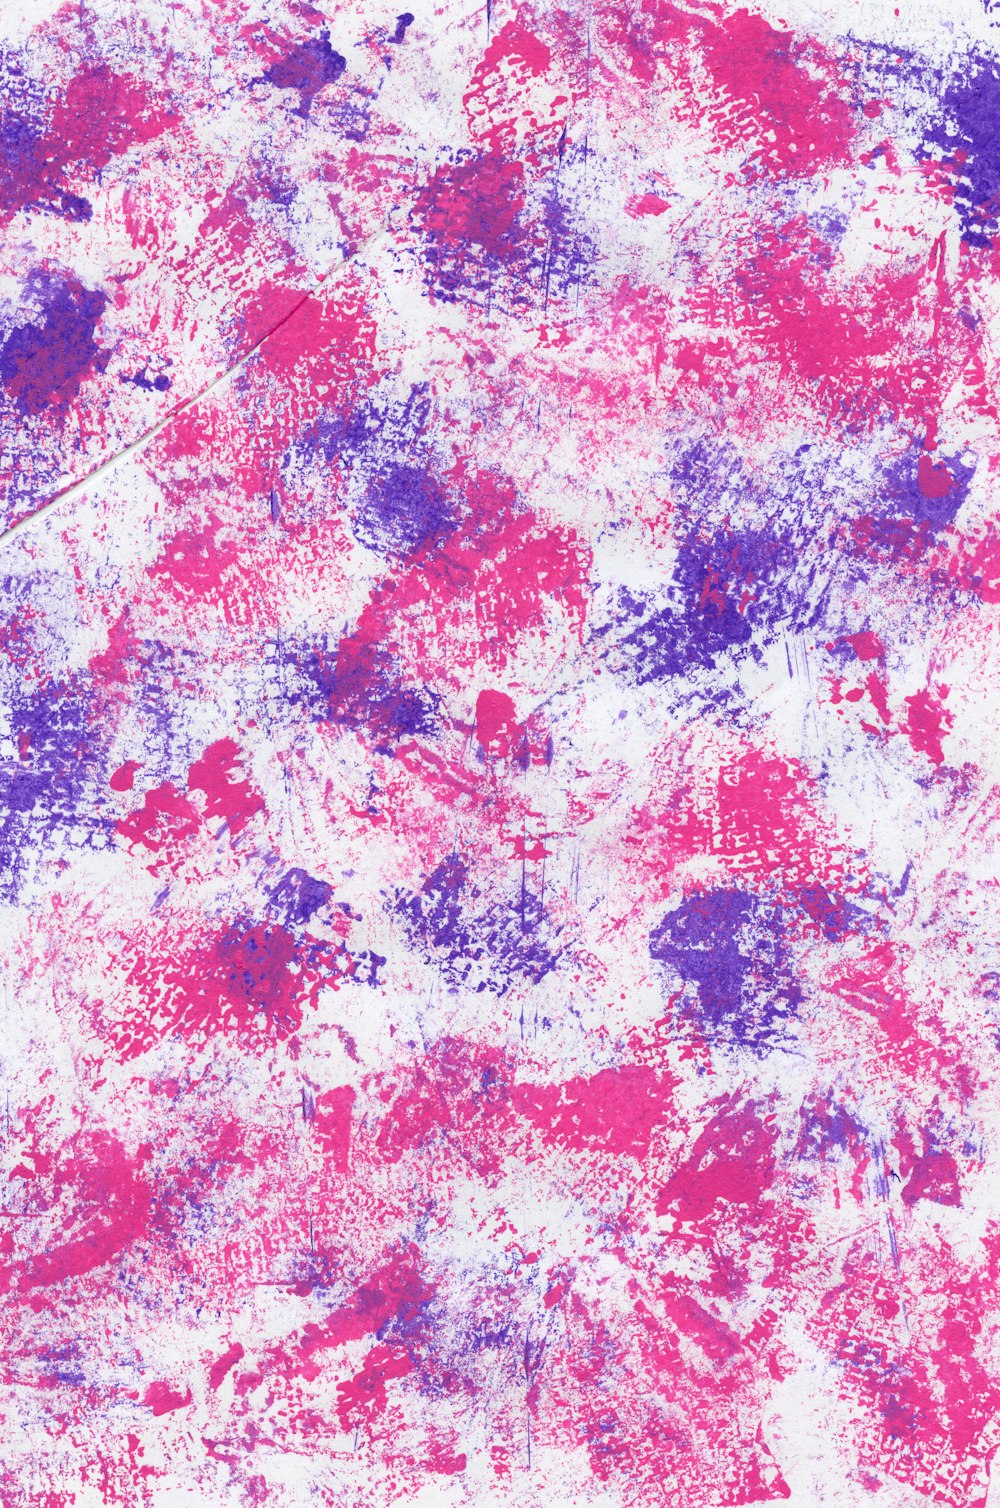 a pink and purple paint splattered on a white surface